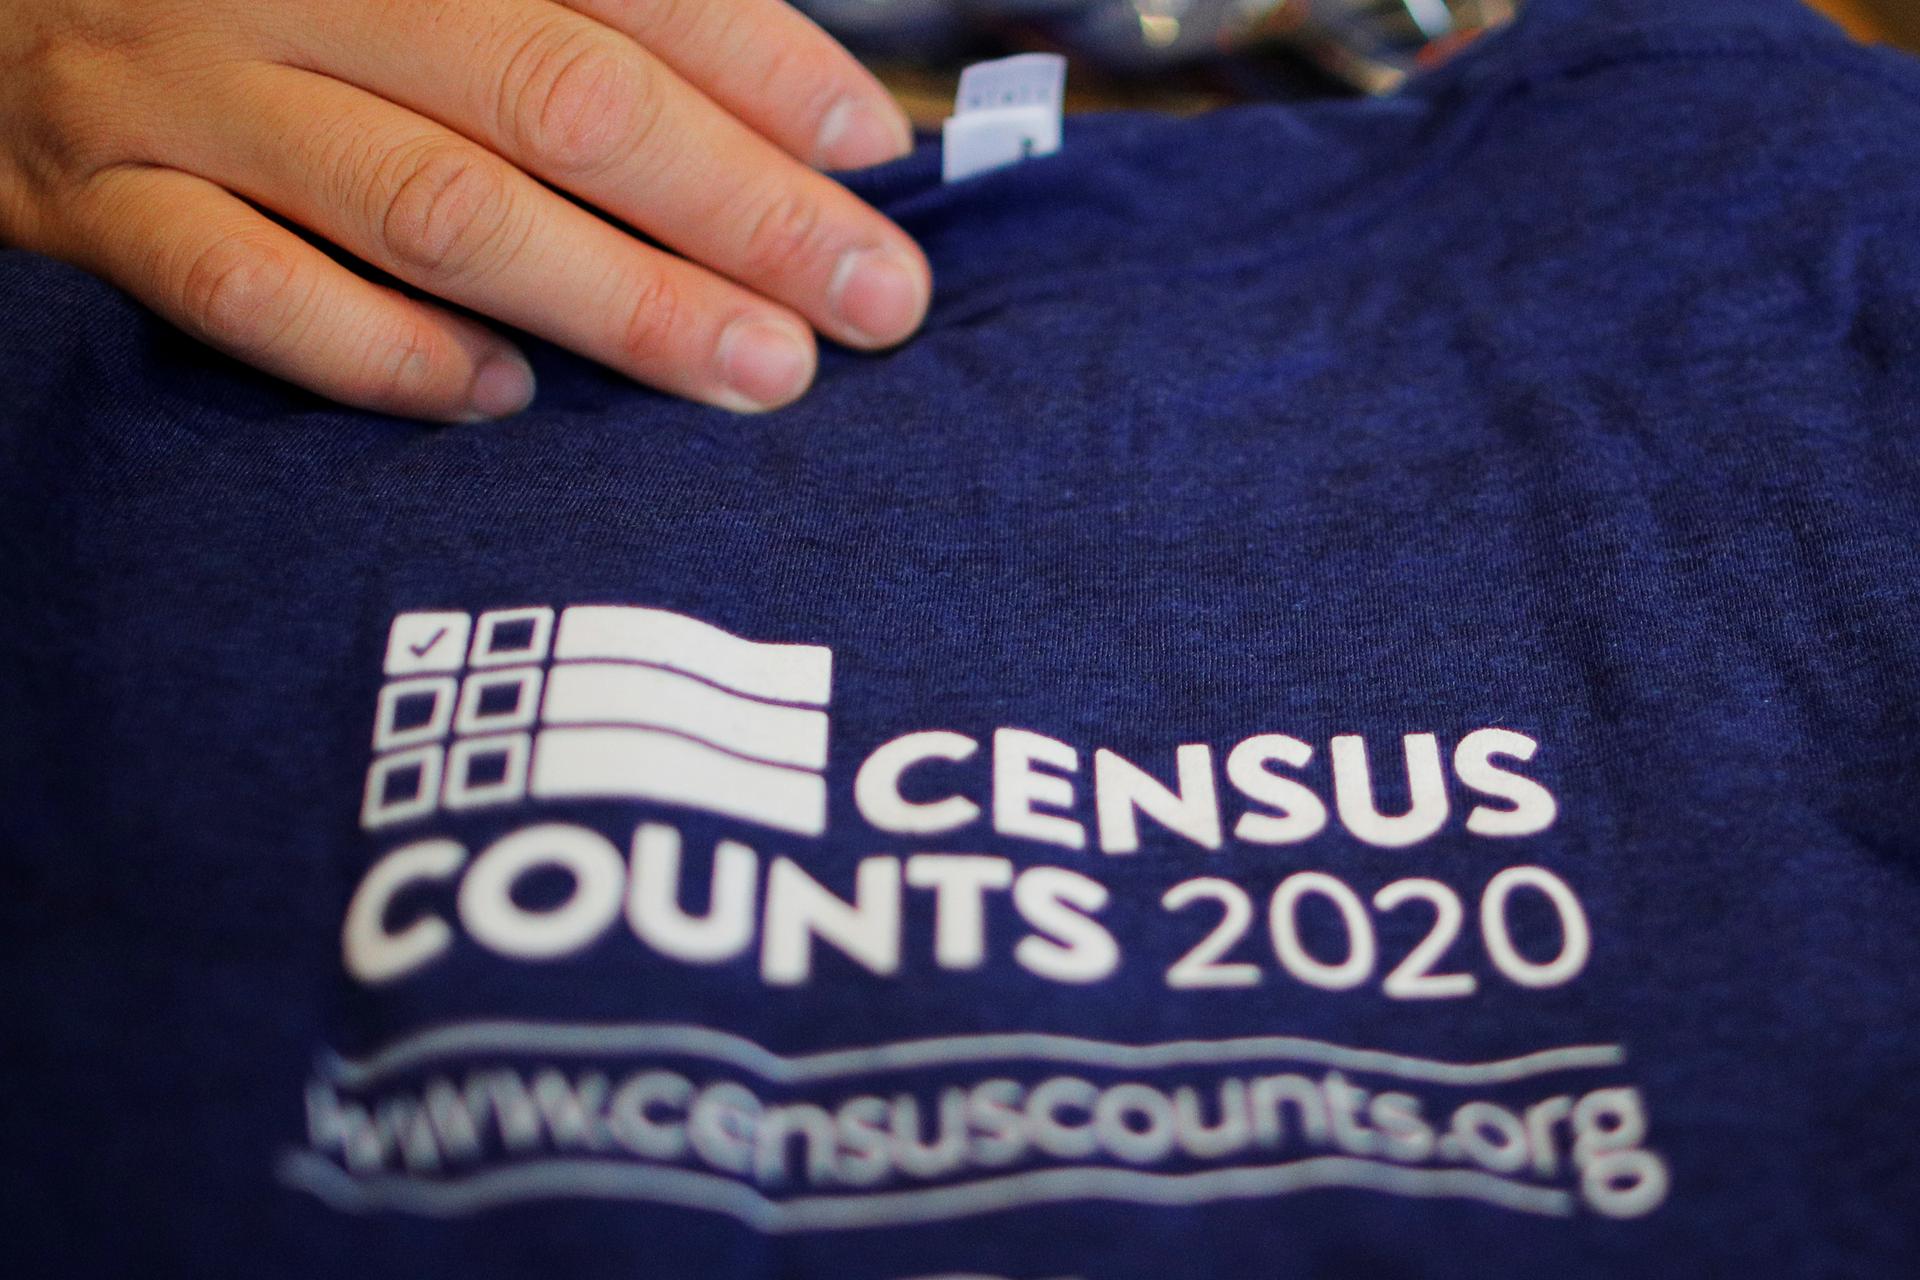 A shirt with the words "Census counts 2020."